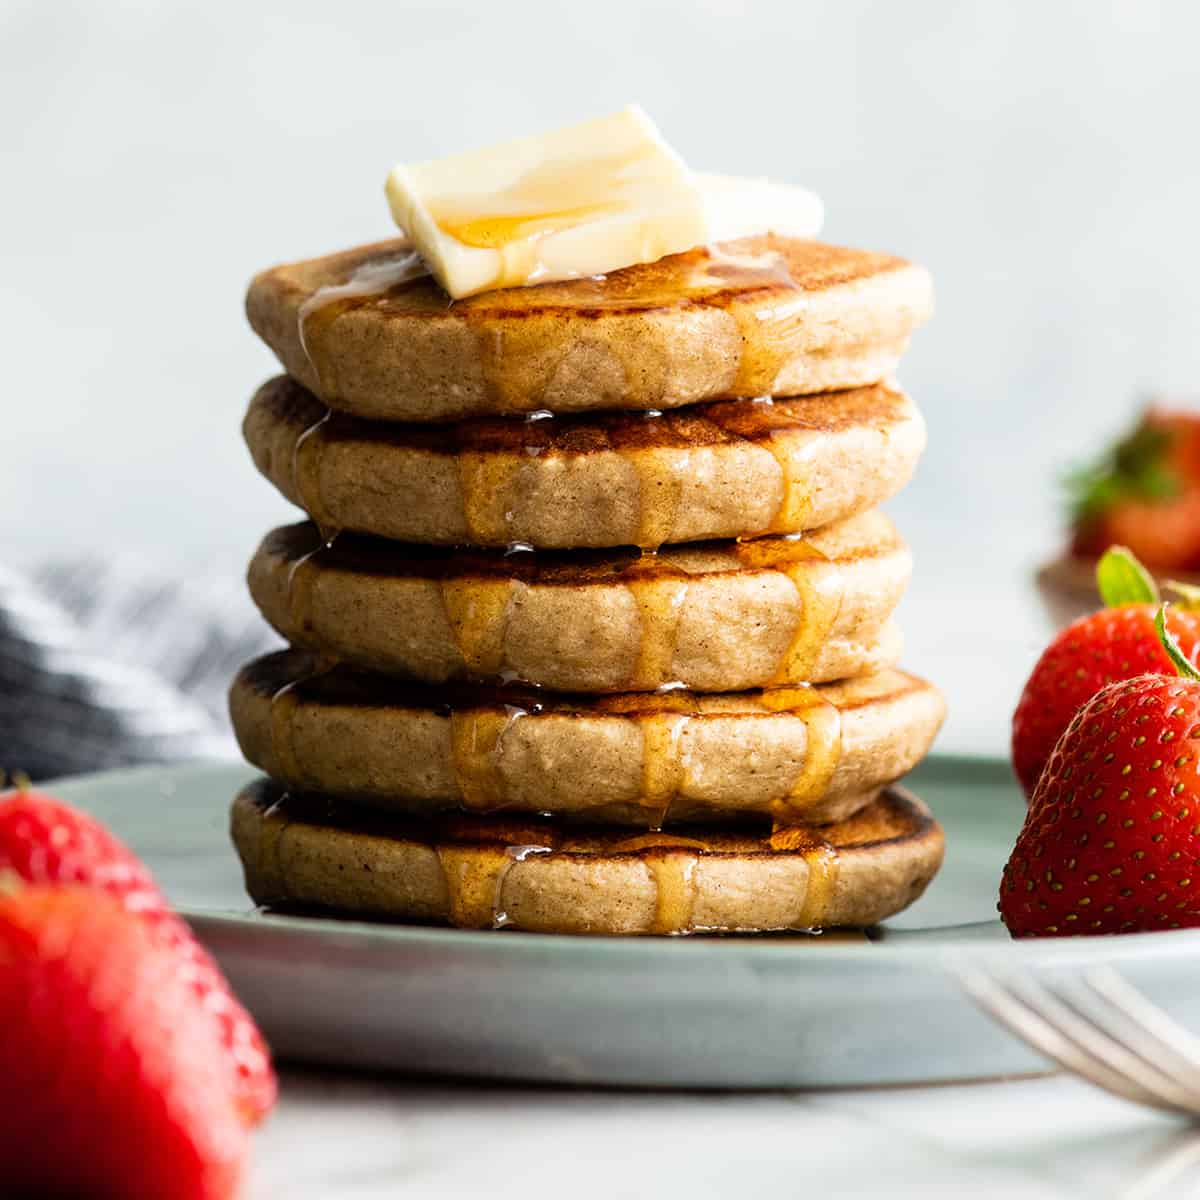 Front view of a stack of 5 banana oatmeal pancakes with butter and syrup